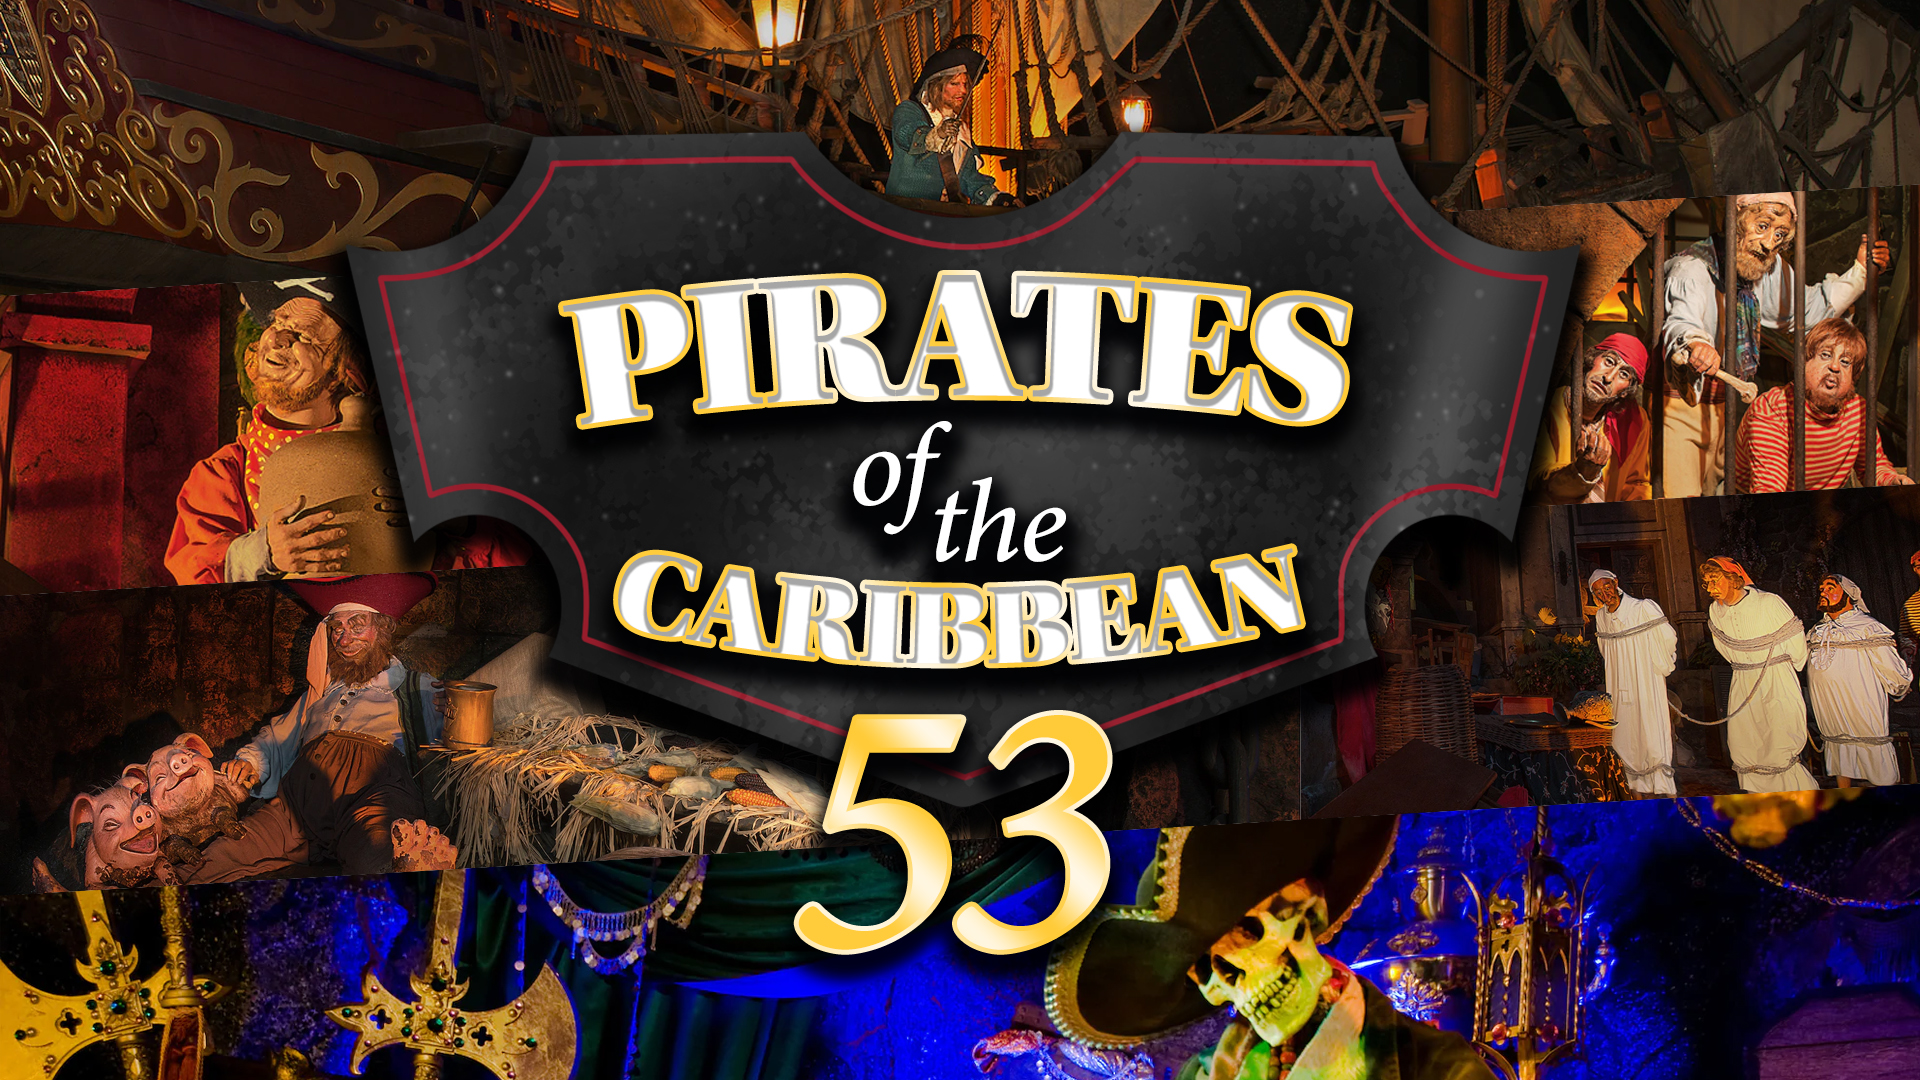 Pirates of the Caribbean download the new version for windows